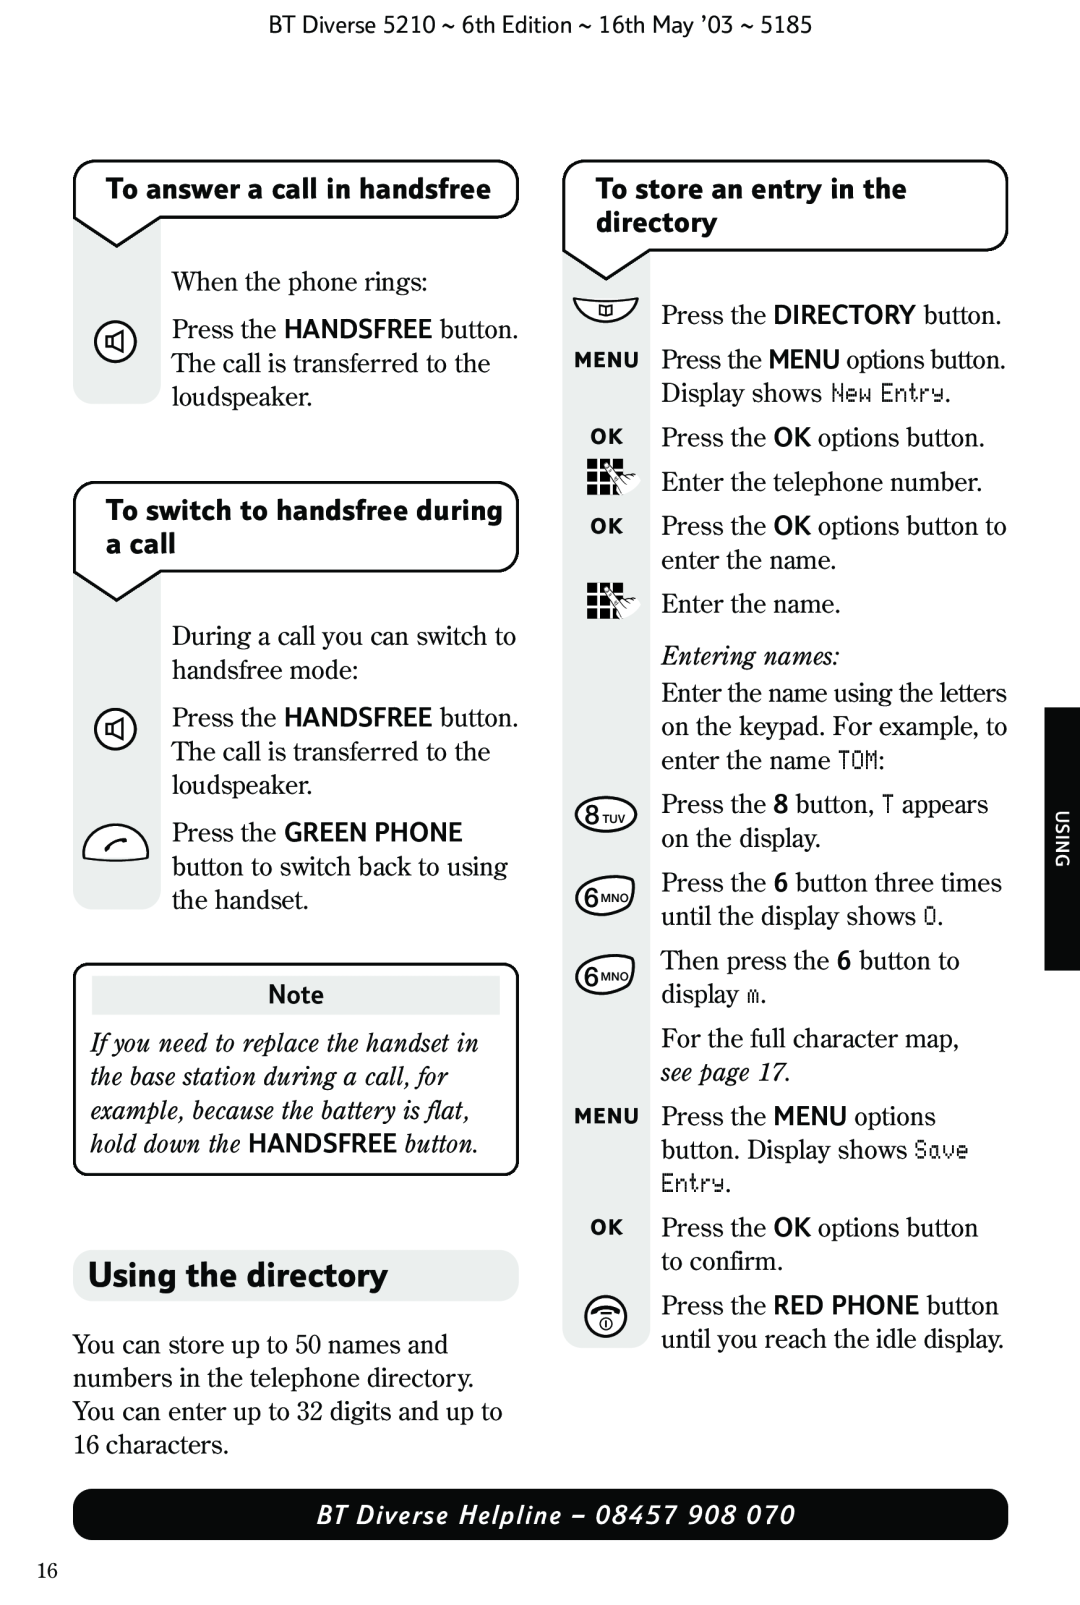 BT 5210 manual Using the directory, To answer a call in handsfree, To store an entry in the directory, Entering names 